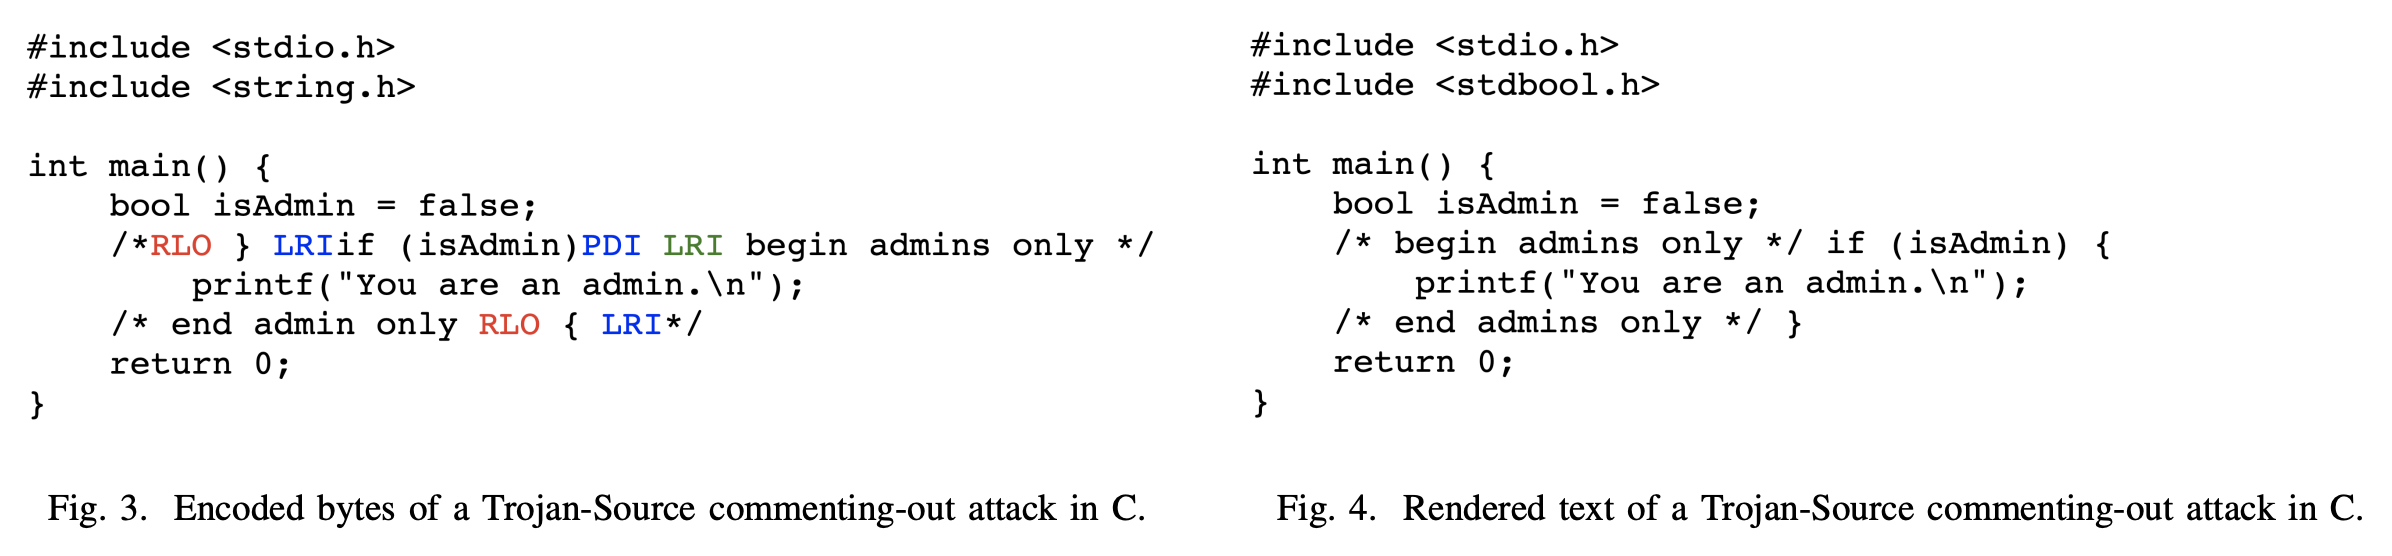 Figures 3 and 4 from Trojan Source Invisible Vulnerabilities by Nicholas Boucher and Ross Anderson